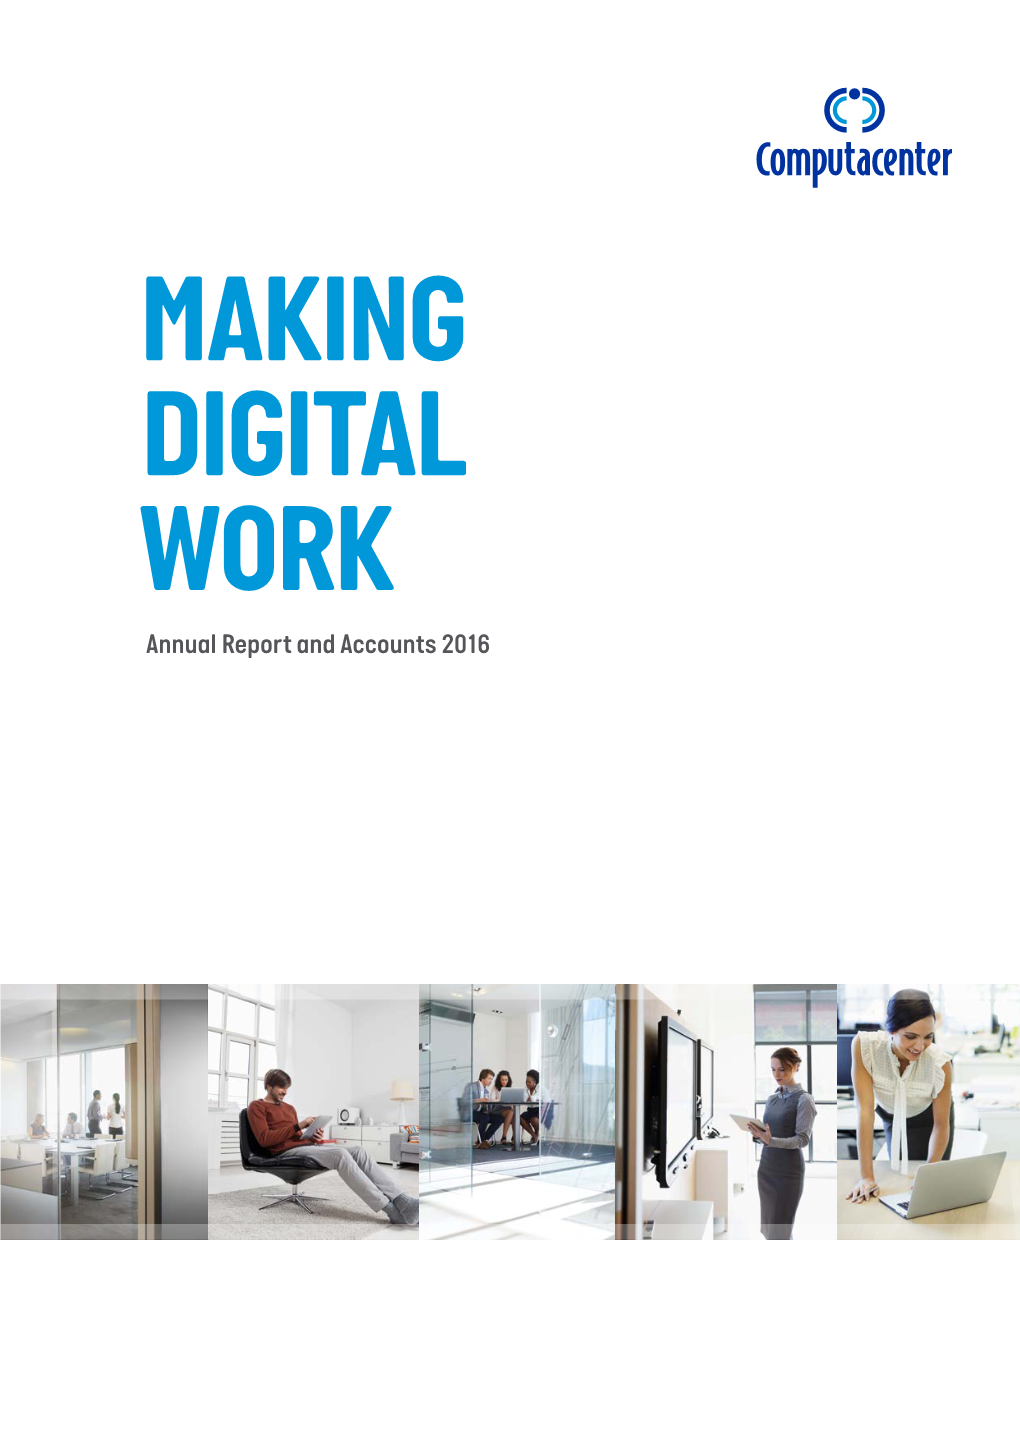 Annual Report and Accounts 2016 Accounts and Report Annual MAKING DIGITAL WORK Annual Report and Accounts 2016 CONTENT OVERVIEW